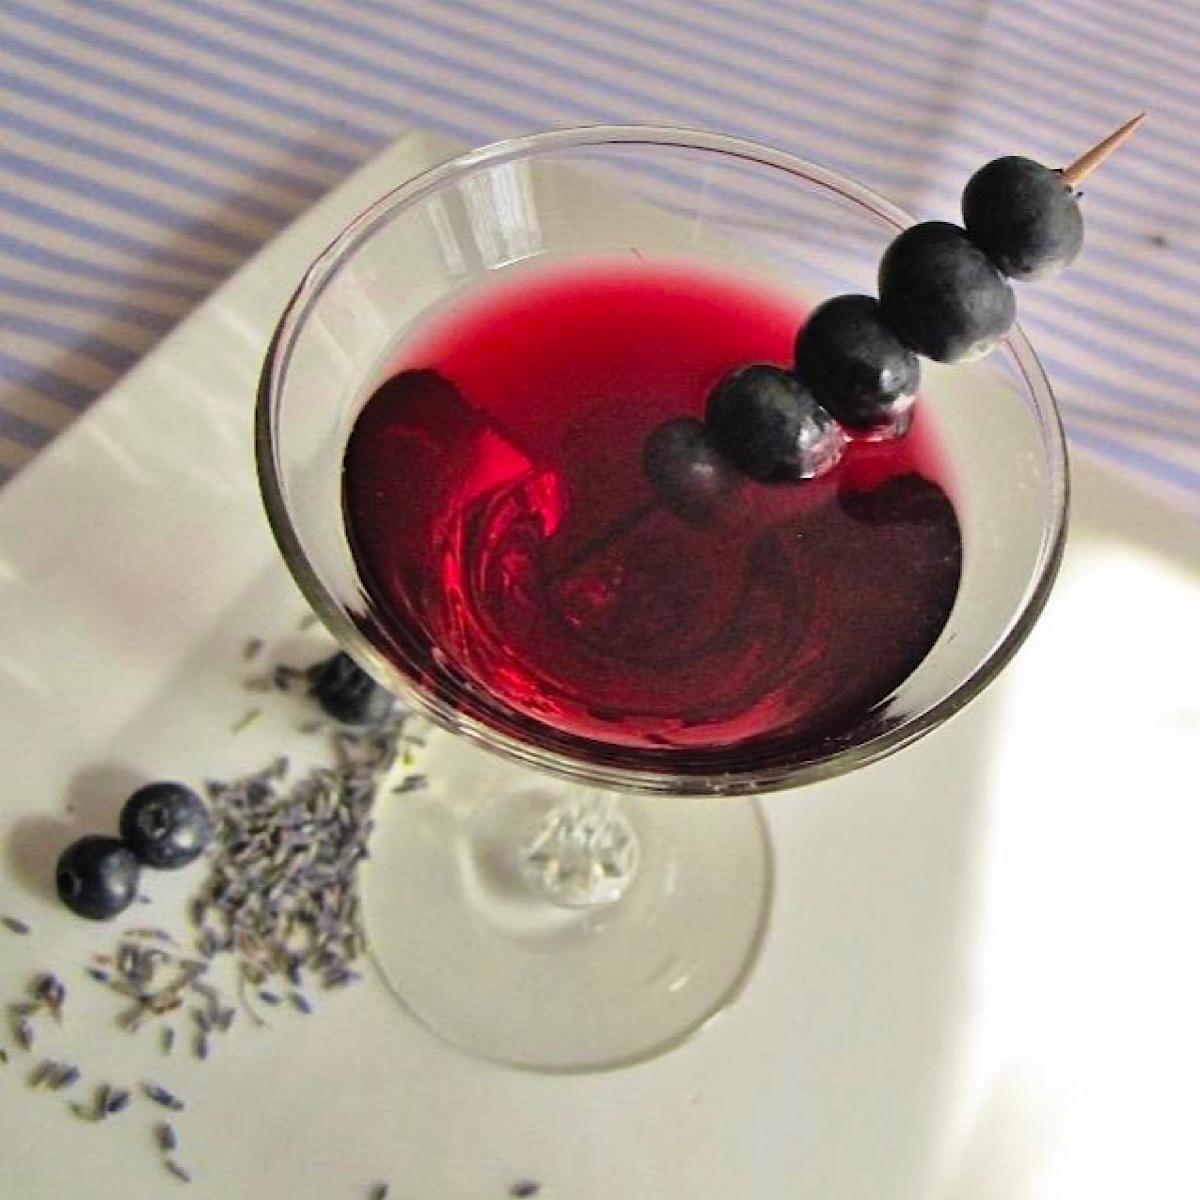 Blueberry martini made with blueberry tarragon shrub syrup